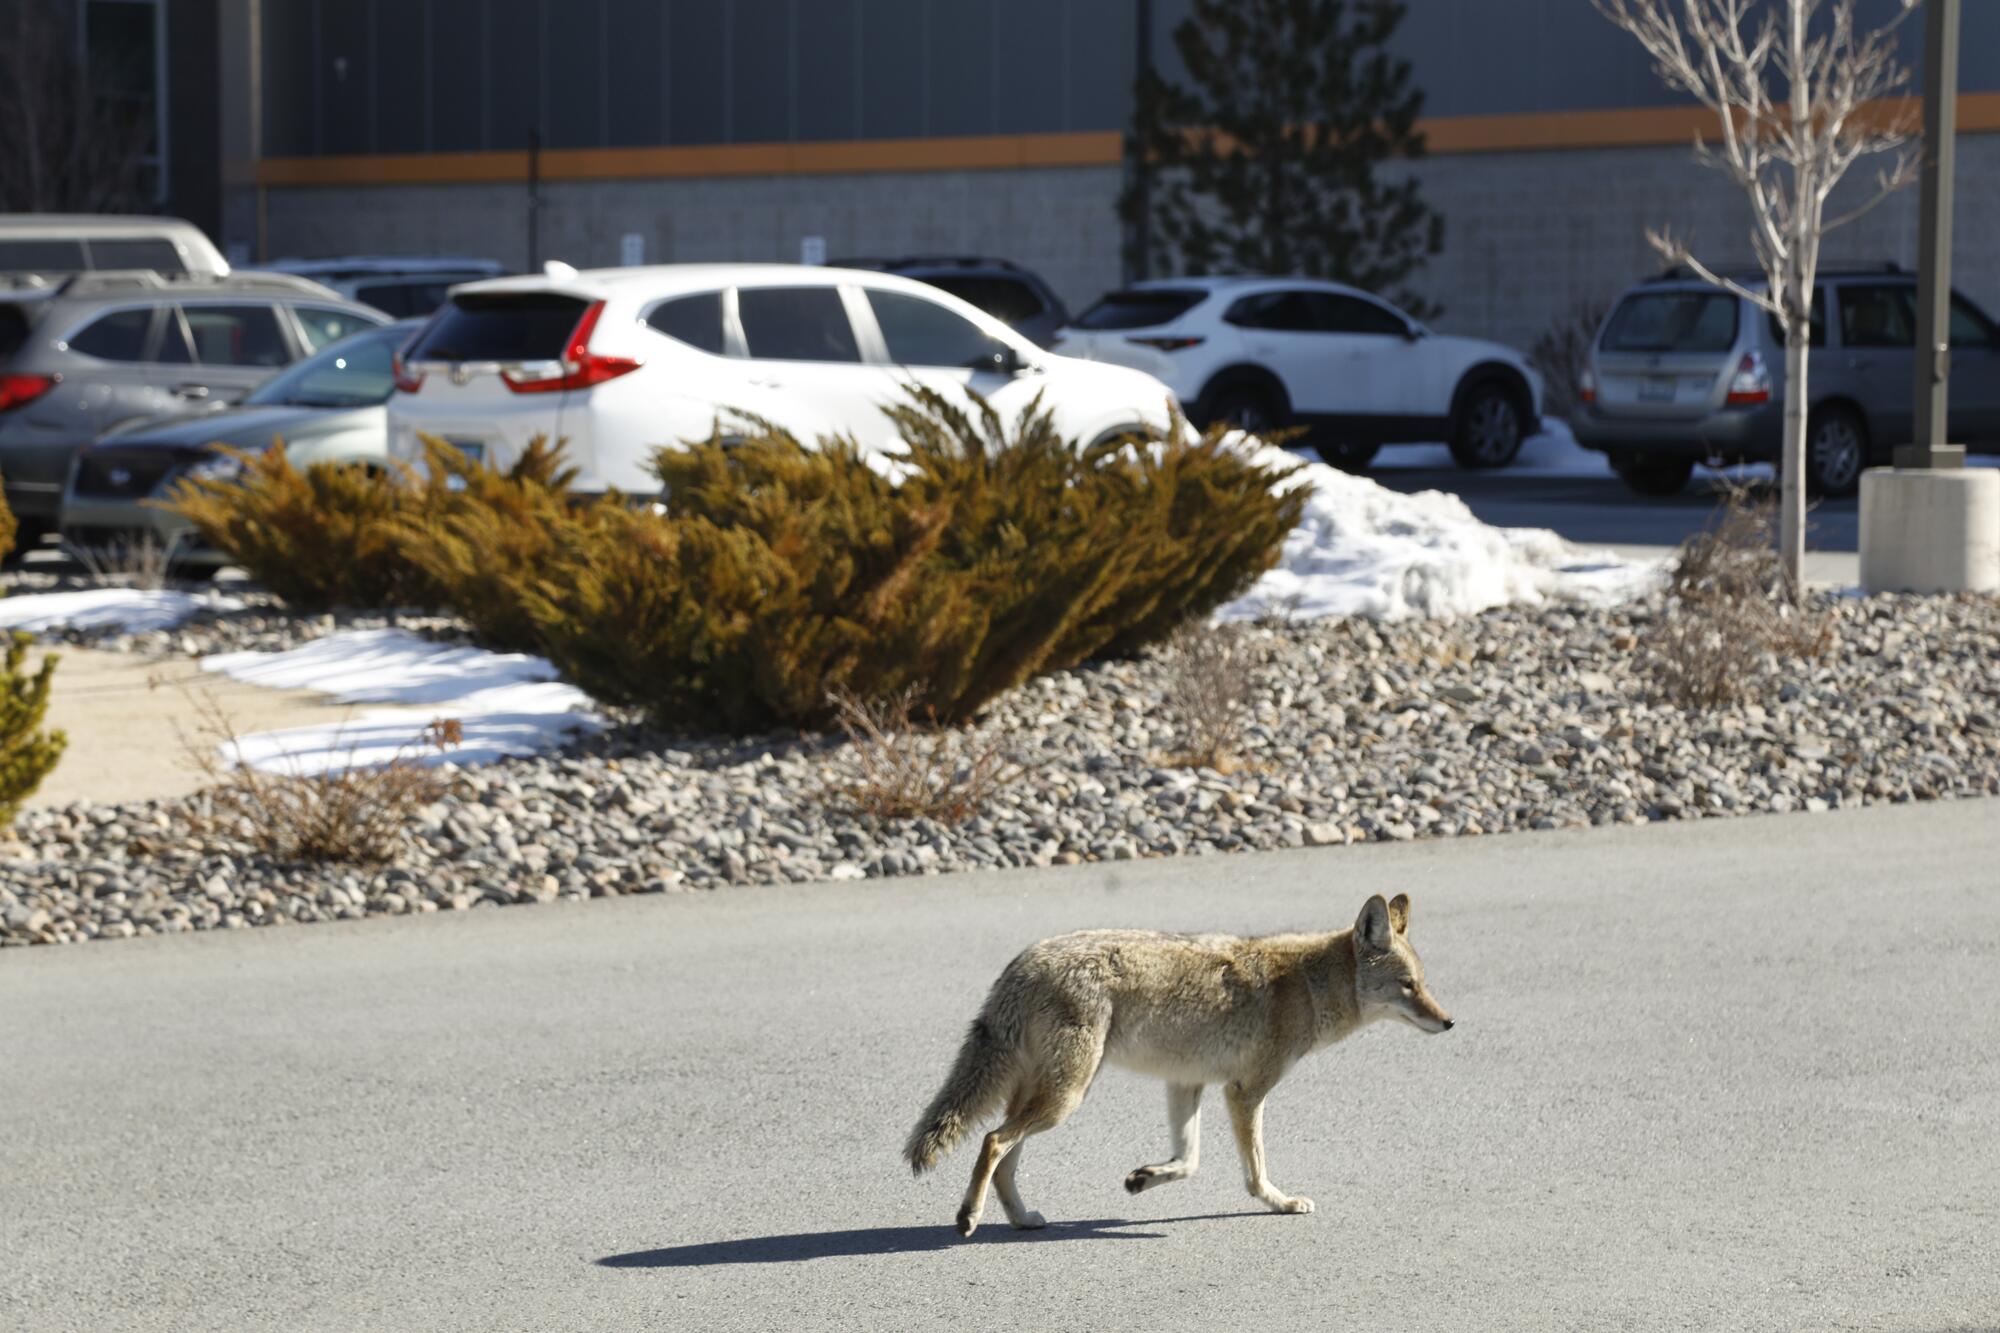 A coyote trots along a road near a parking lot.